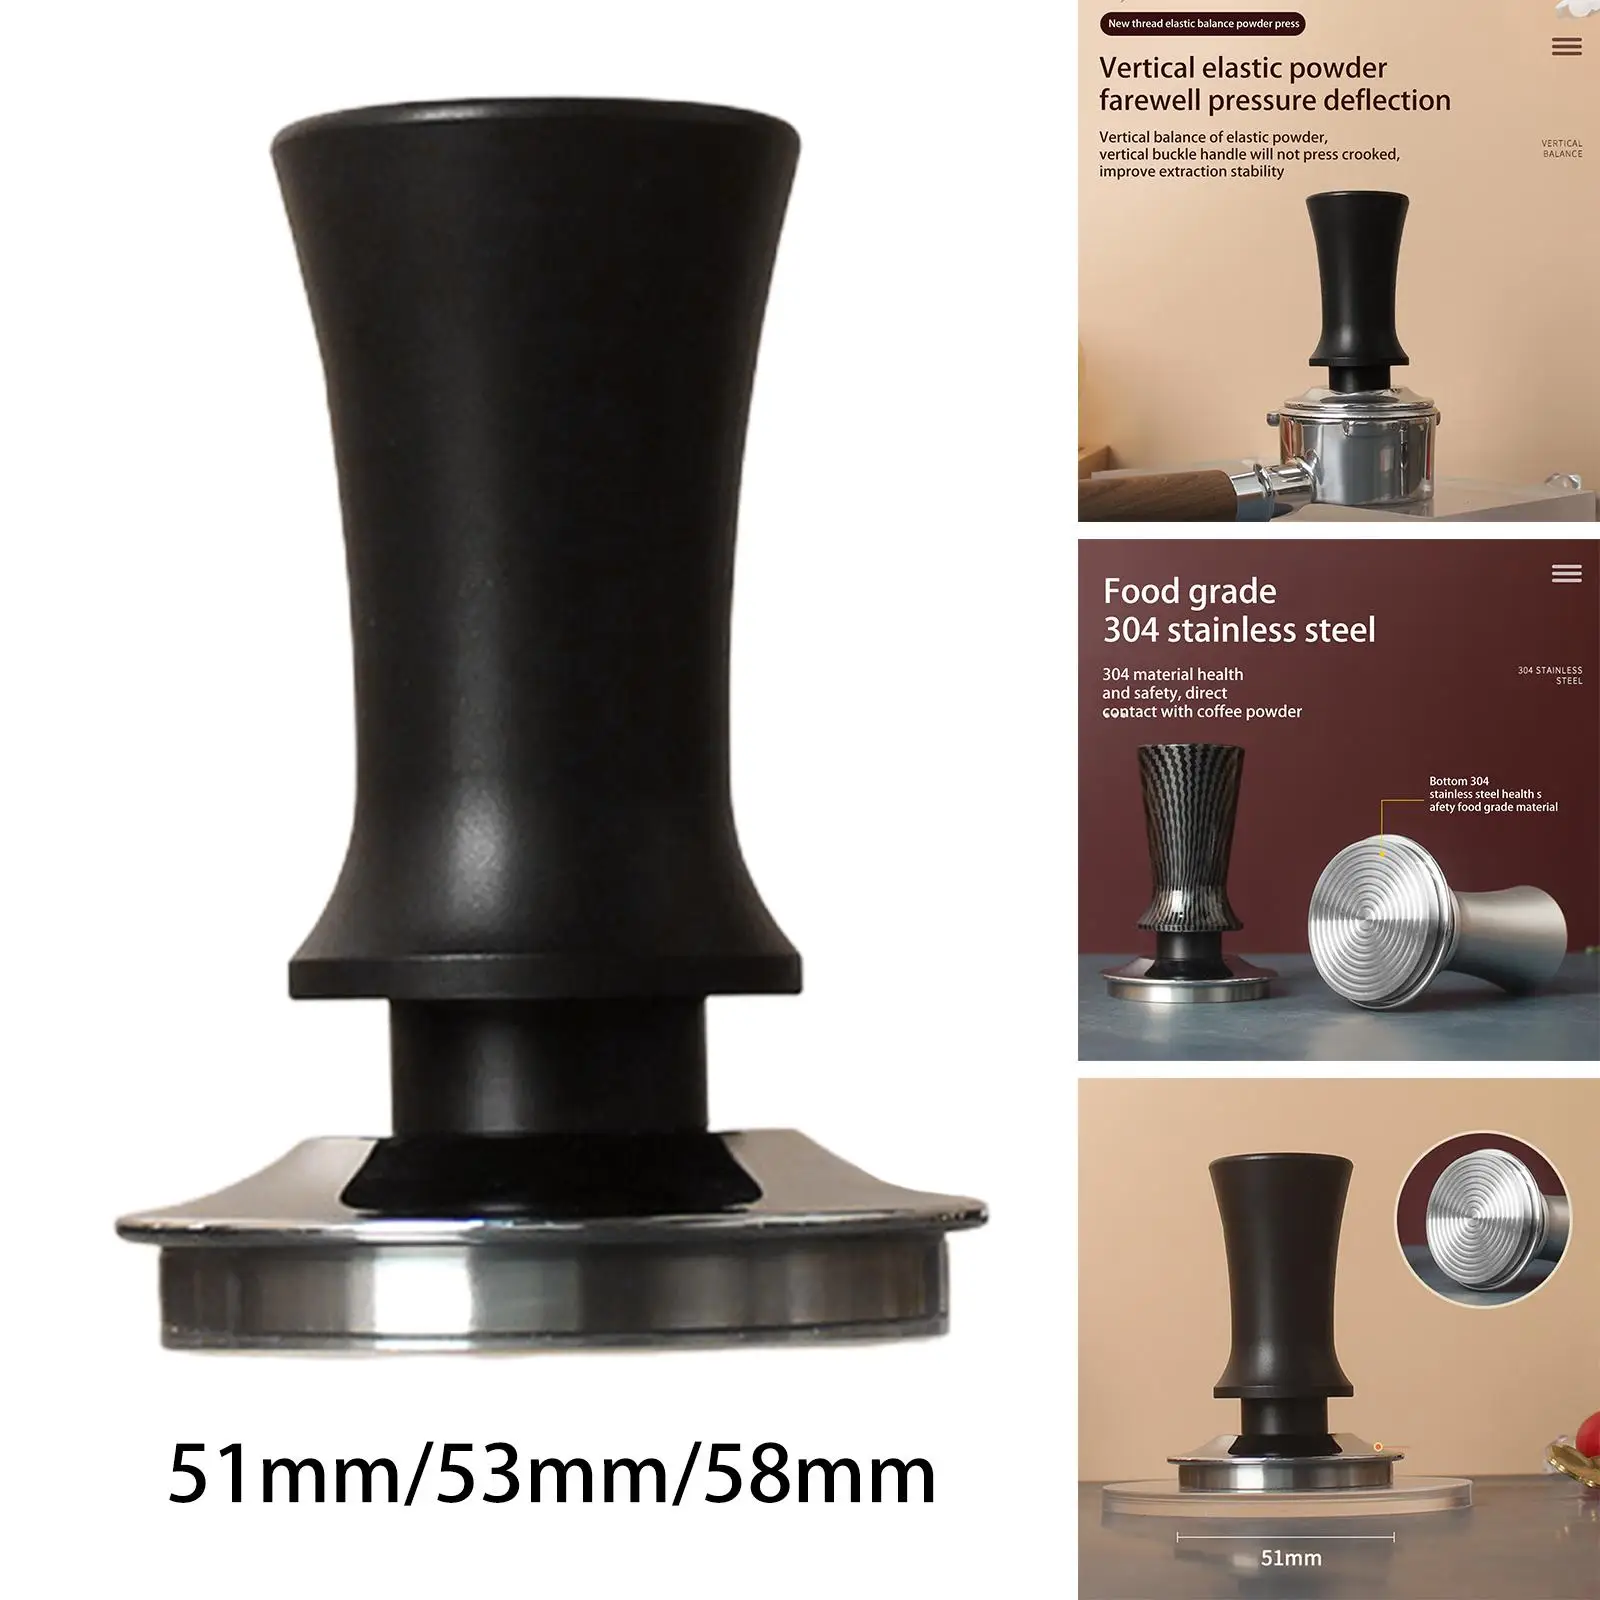 Espresso Tamper Calibrated Pressure Spring Loaded Flat Pressure with Circular Baffle Pressed Down Vertically Accessory Tool